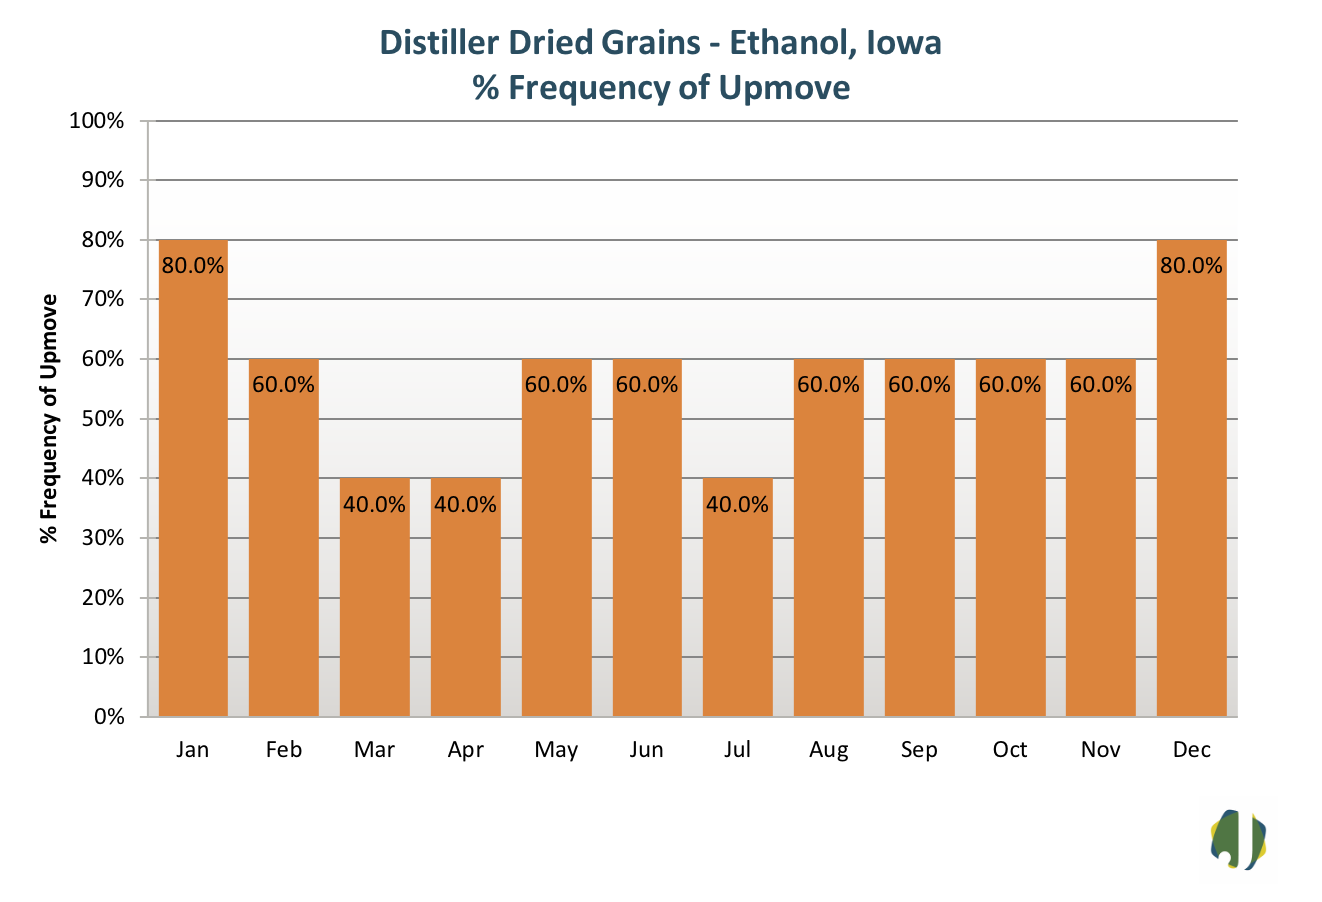 distillers dried grains ethanol iowa frequency of upmove